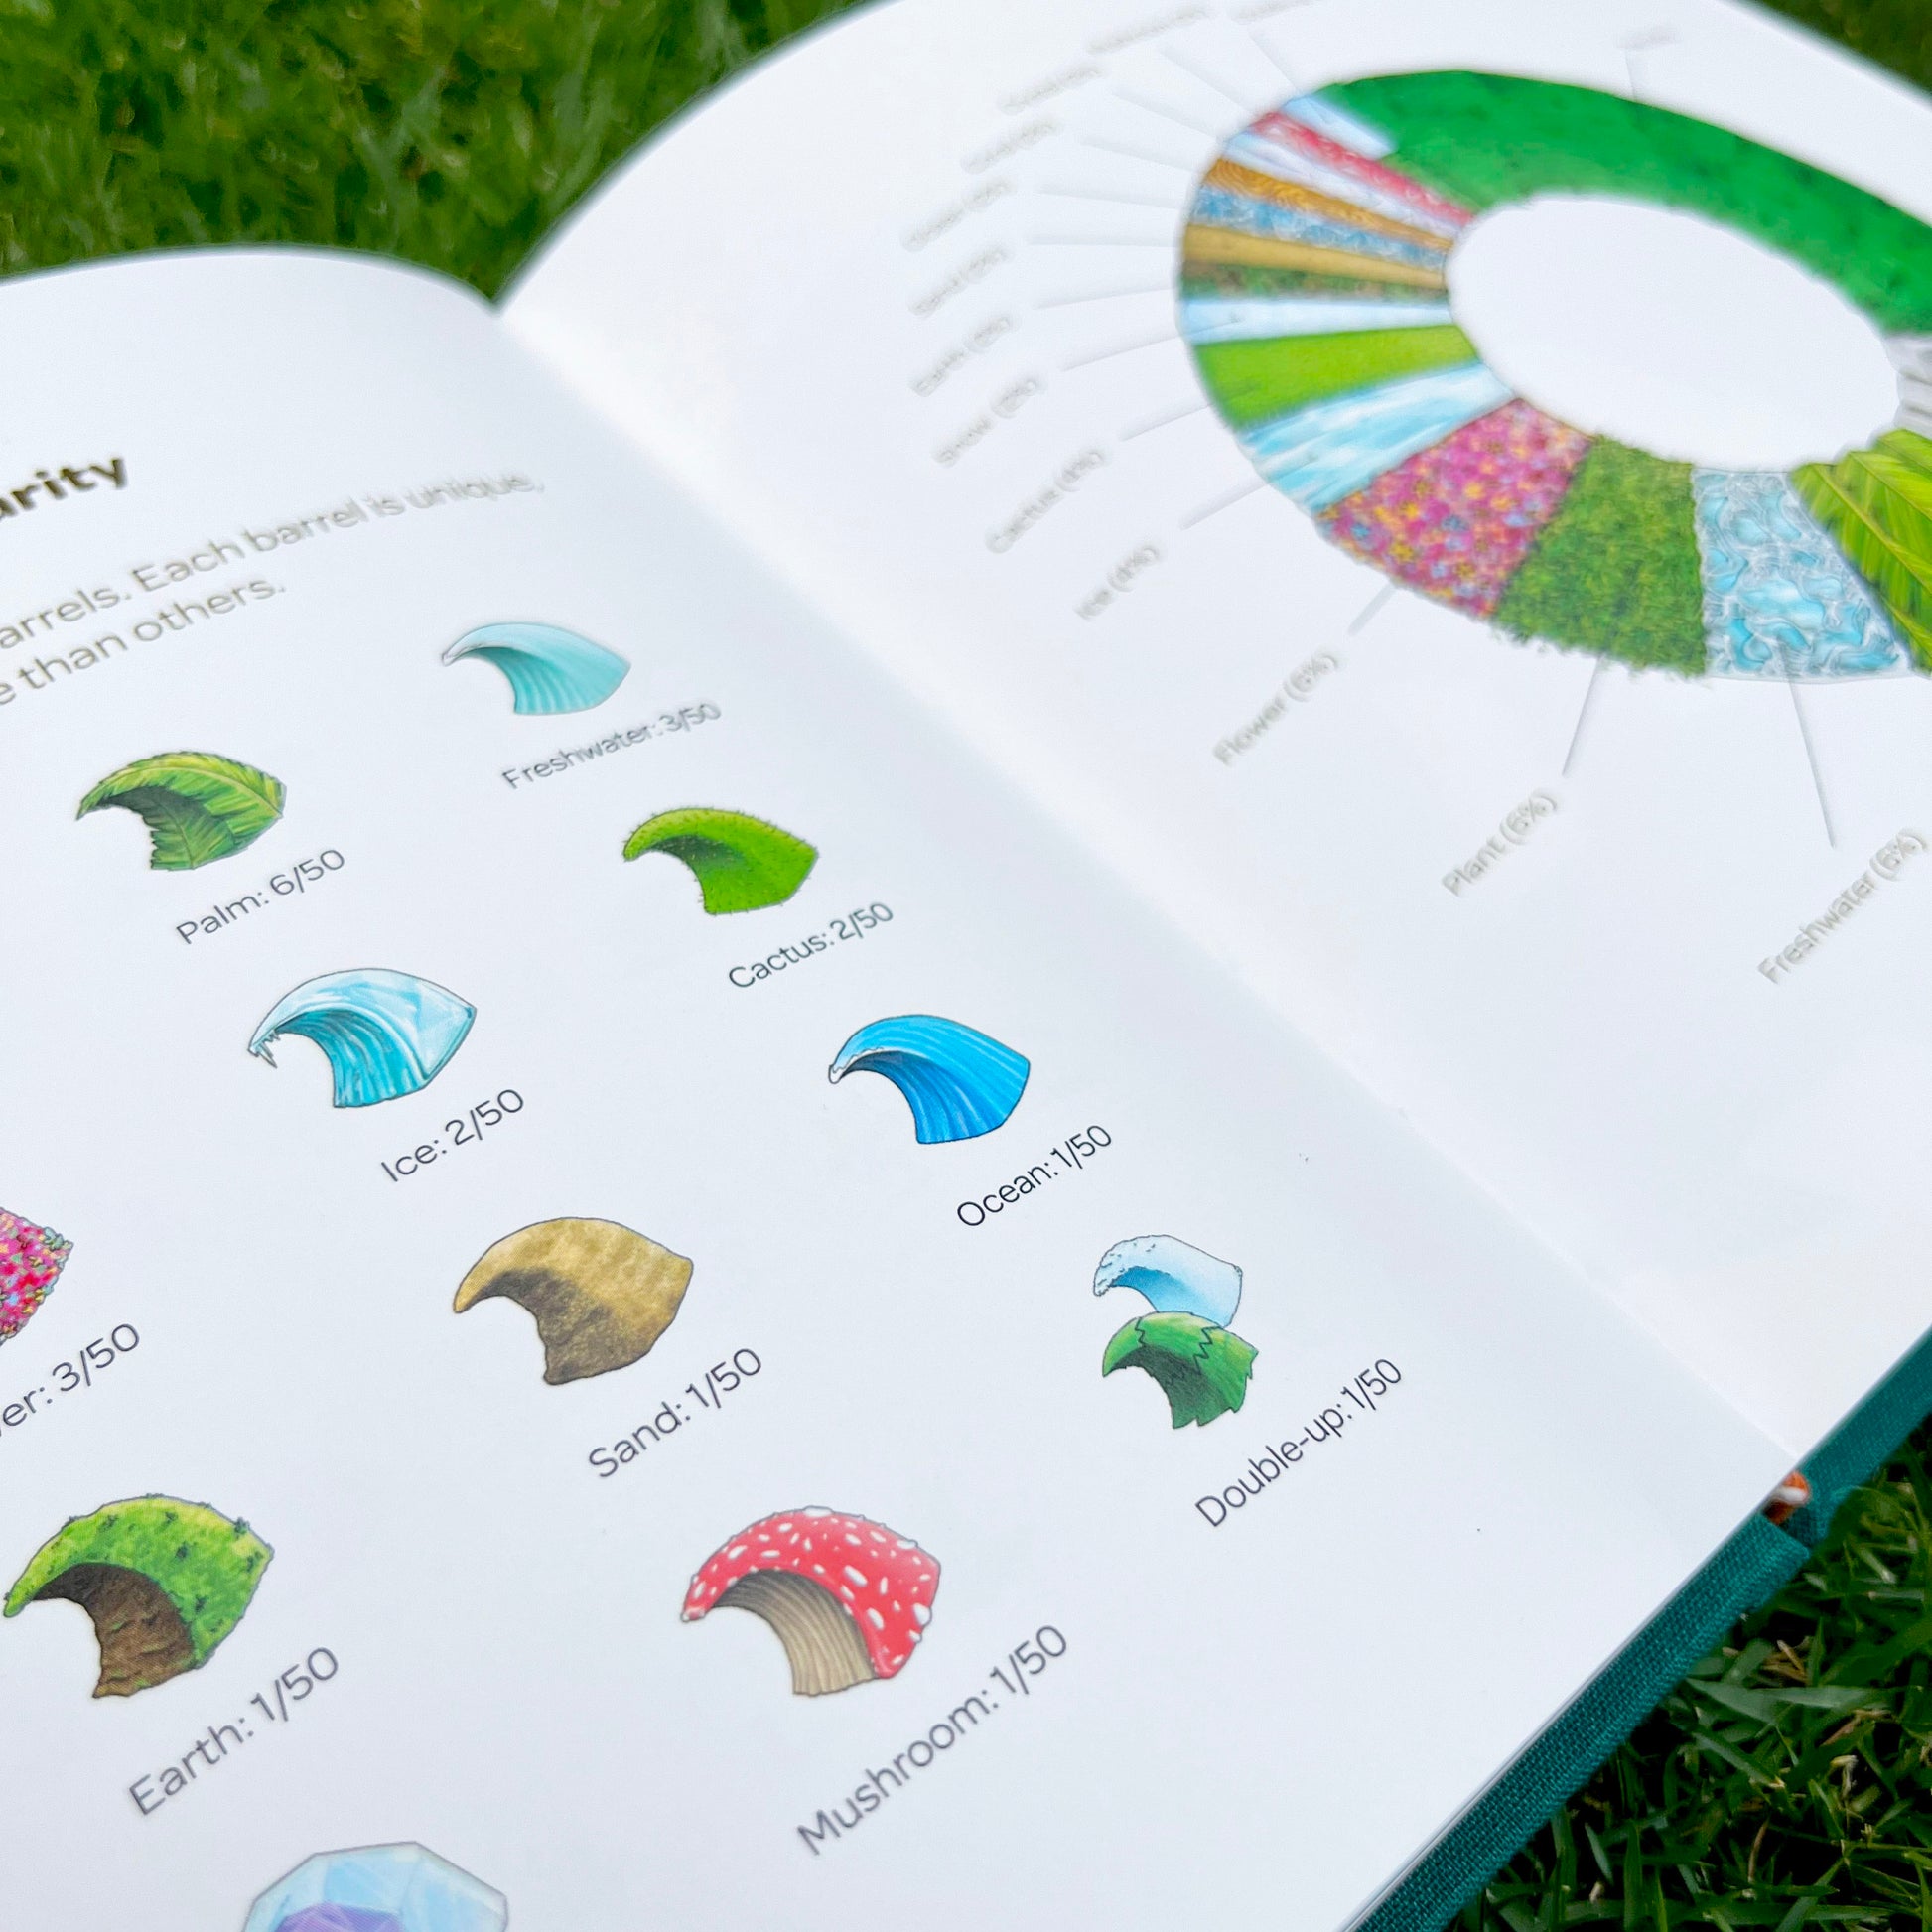 A close-up view of an open book on grass, showcasing a page with various illustrated barrel waves labeled 'Palm', 'Ice', 'Cactus', etc., next to a circular infographic representing barrel rarity in the book. 